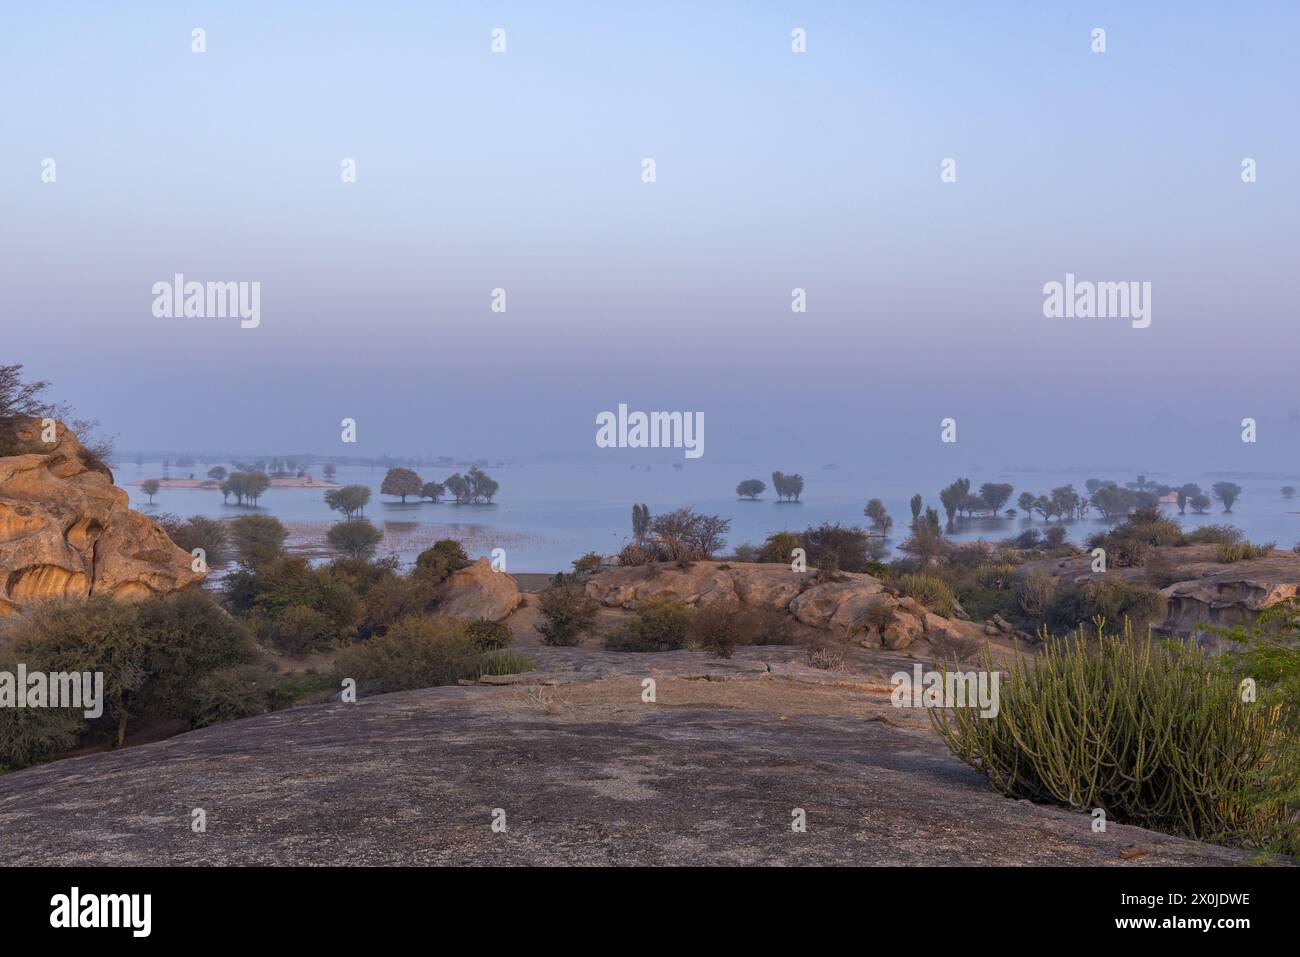 View of Jawai Dam as seen from a rocky hillock during early morning hours (Rajasthan, India) Stock Photo